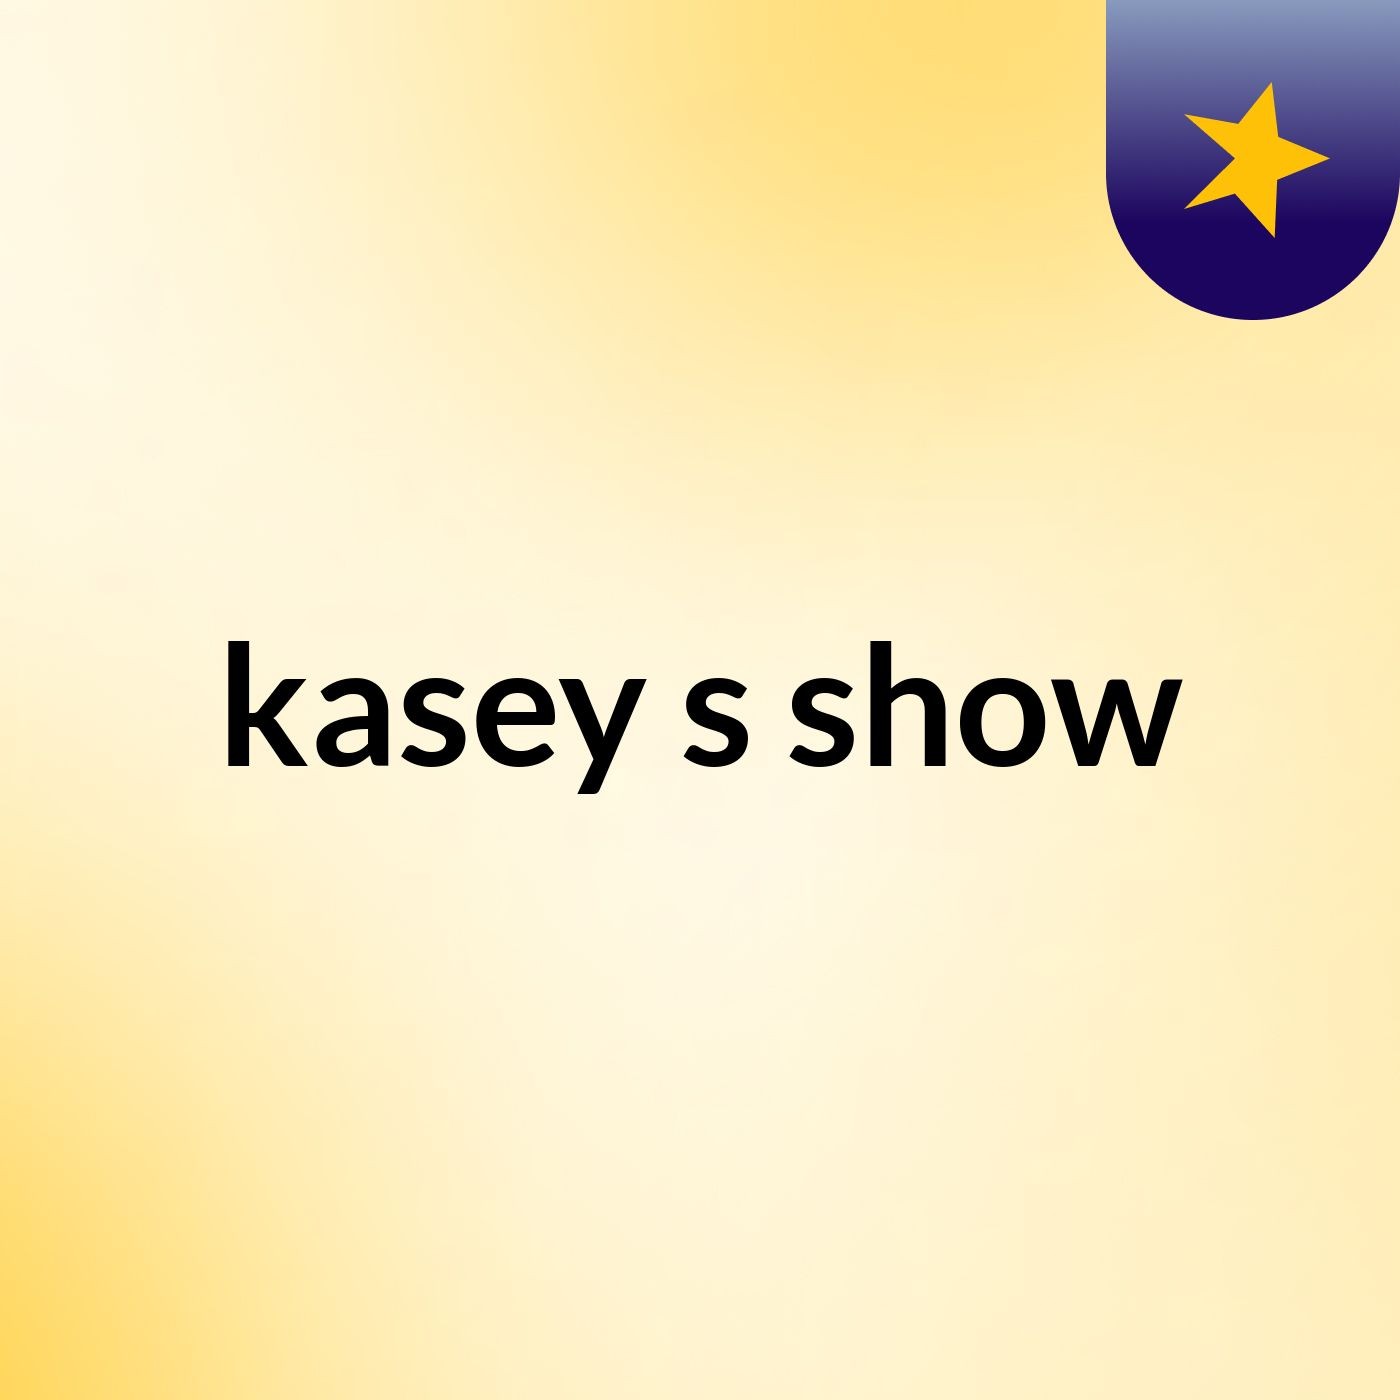 kasey's show